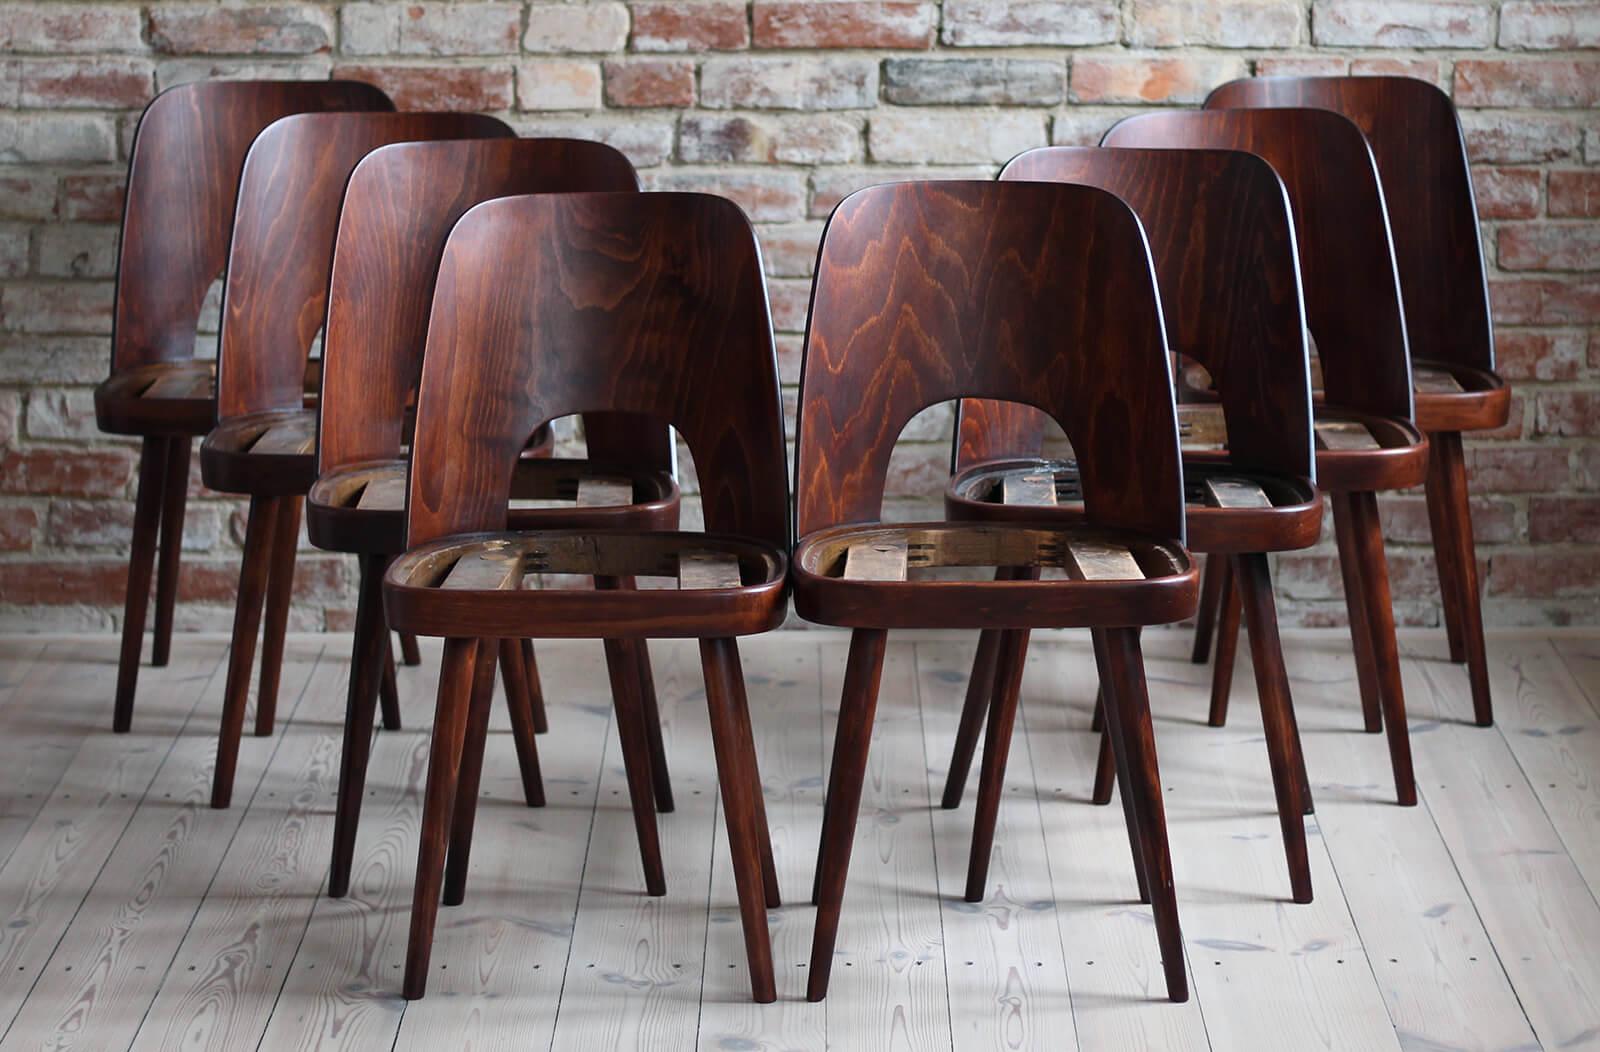 This set of 8 vintage dining chairs was designed by Oswald Haerdtl in the 1950s, famous Austrian designer - together with Mr. Josef Hoffmann he designed the cafe terrace at the Vienna Werkbund Exhibition of 1930, where they designed every little